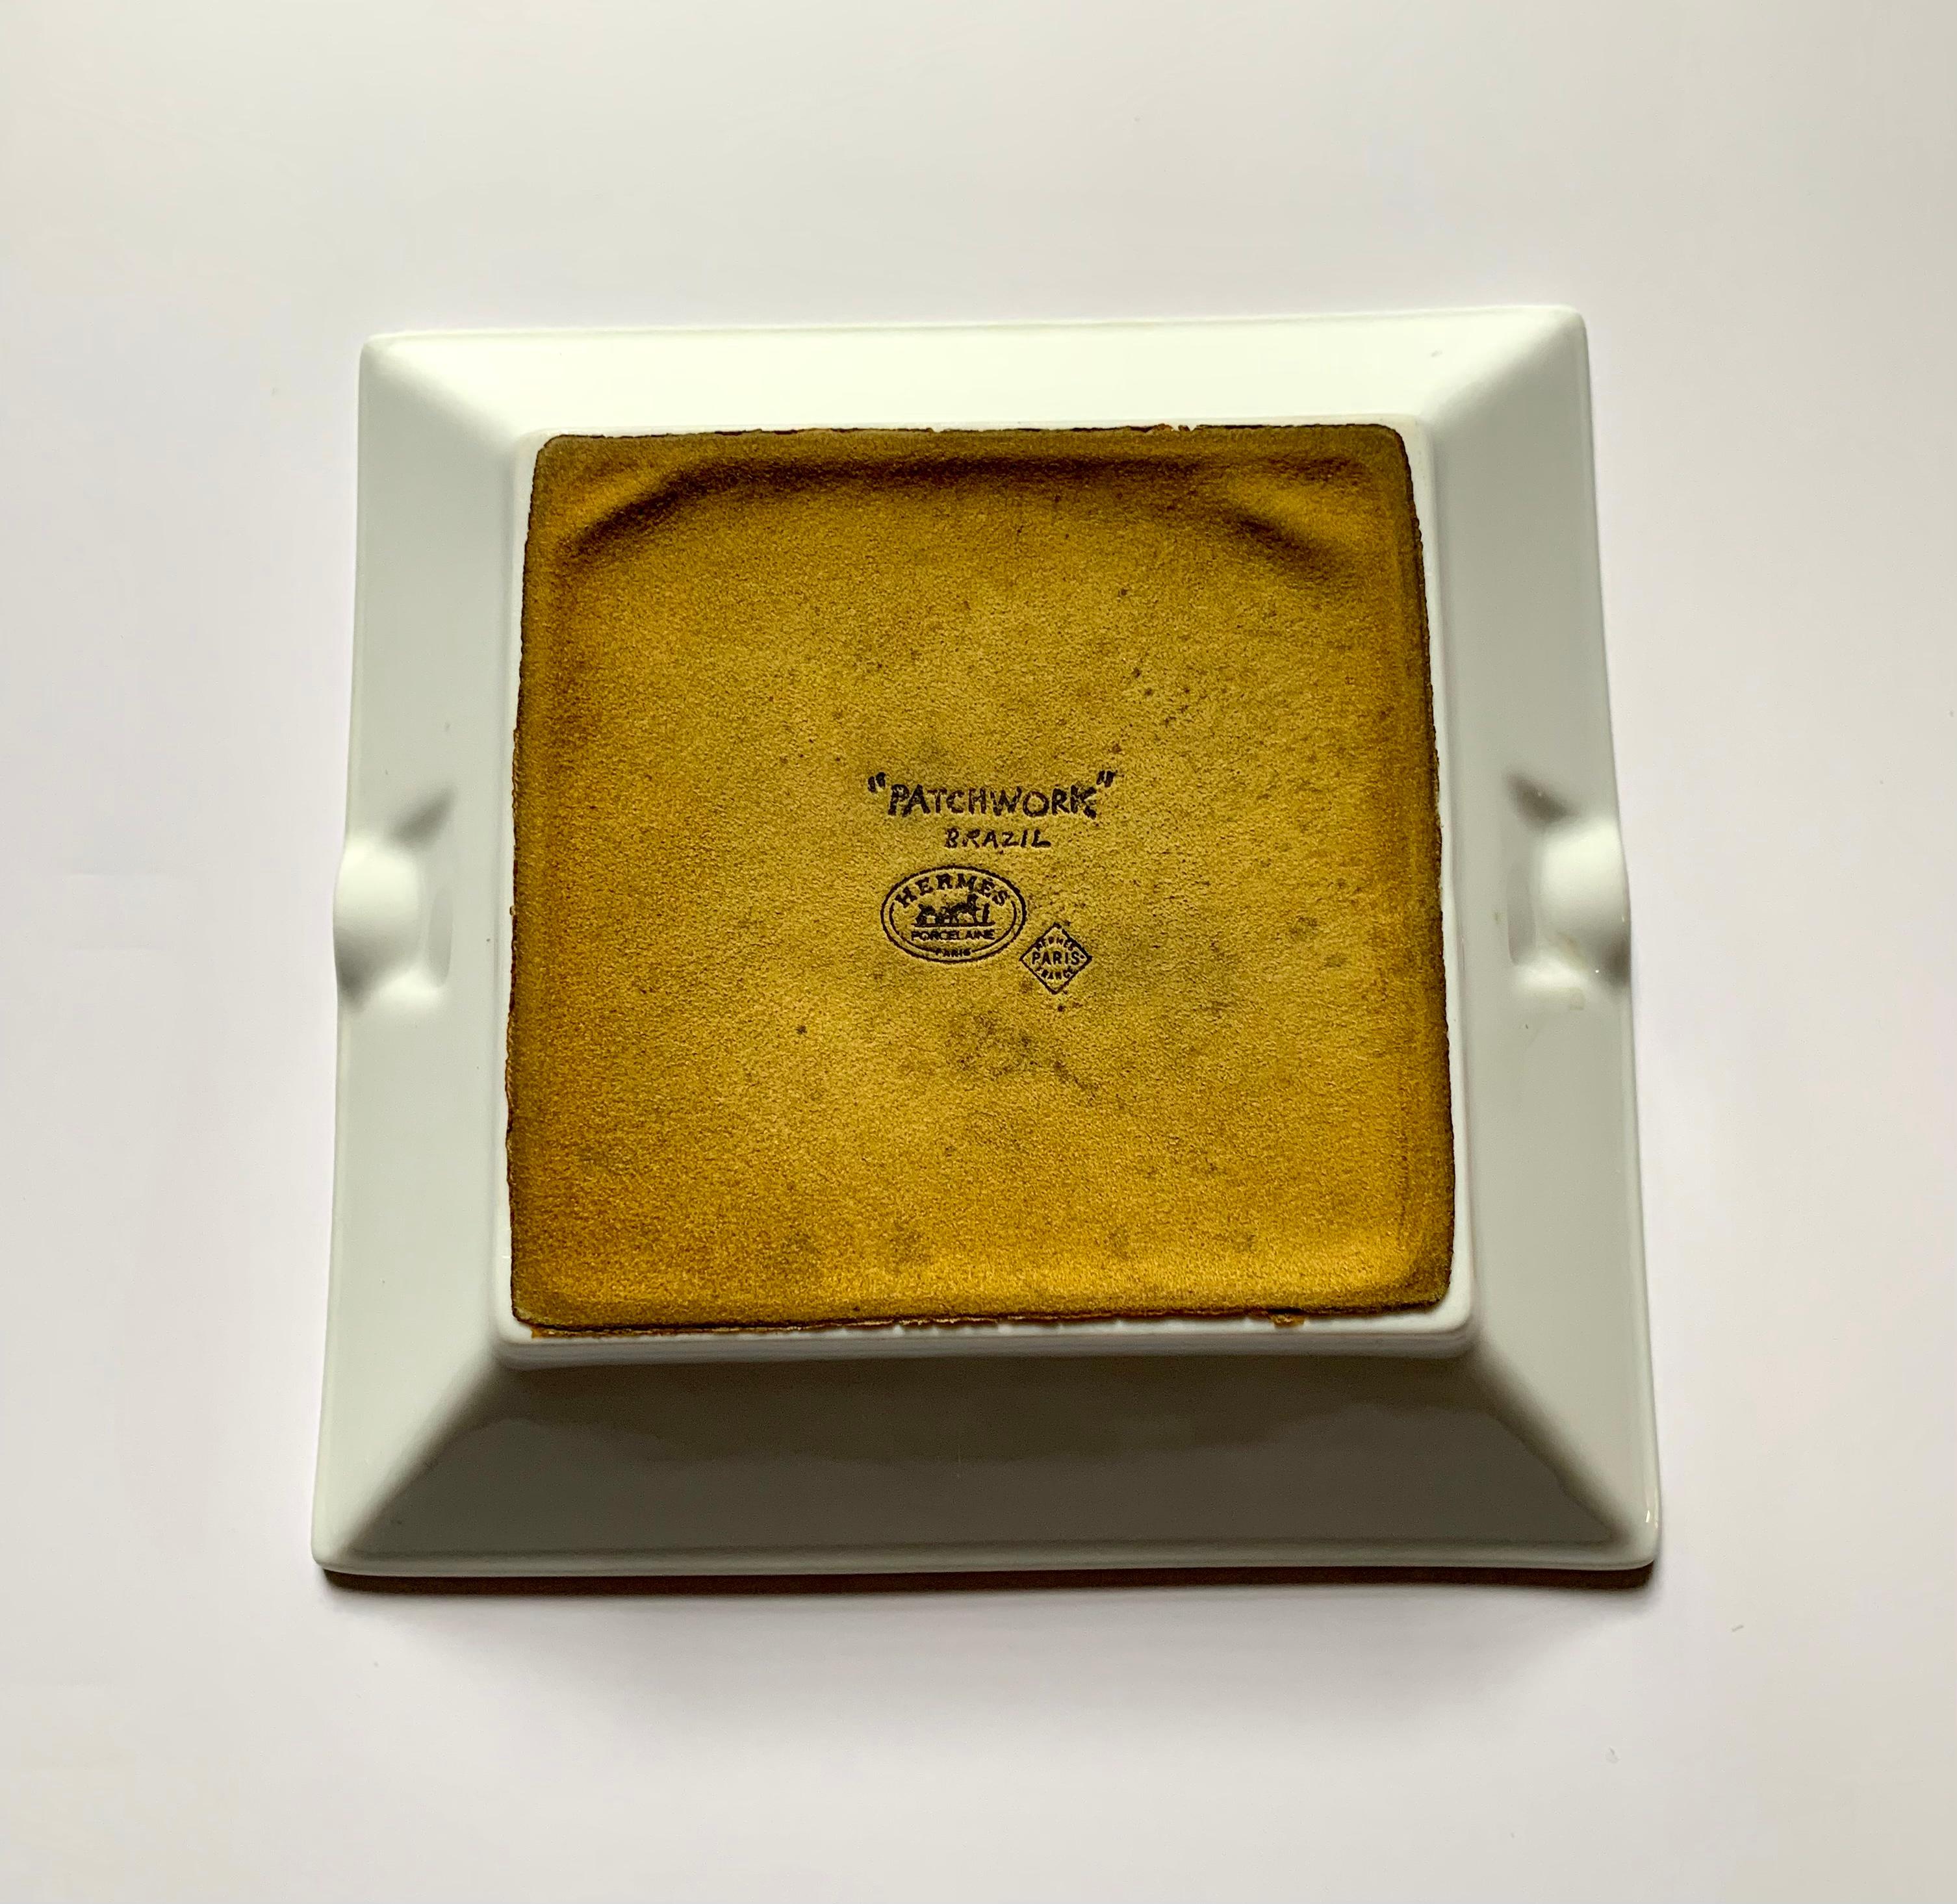 Hermès Brazil Square Ashtray In Excellent Condition For Sale In West Hollywood, CA